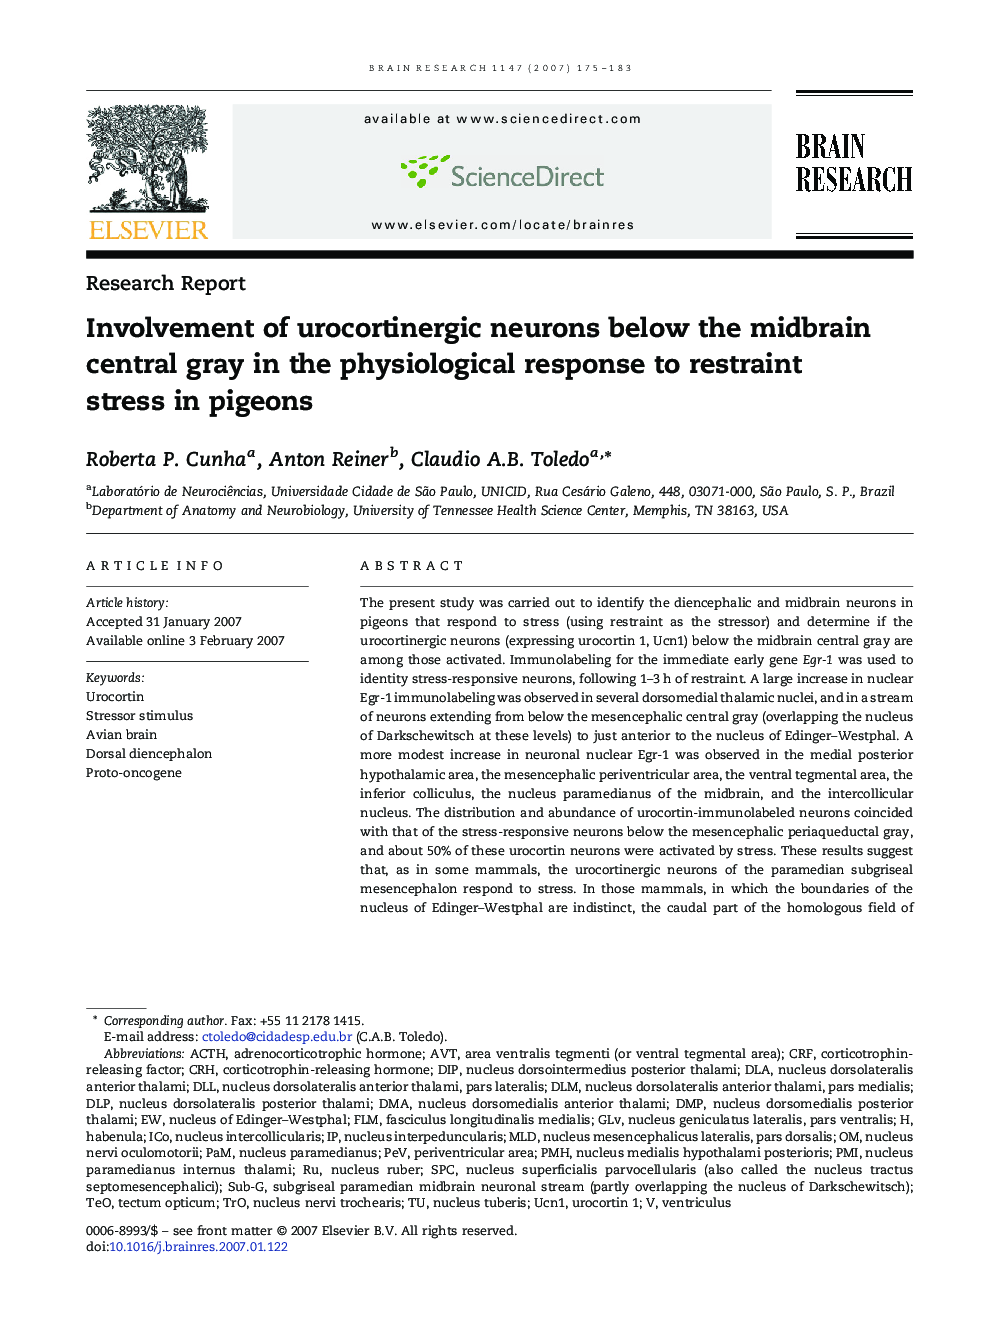 Involvement of urocortinergic neurons below the midbrain central gray in the physiological response to restraint stress in pigeons